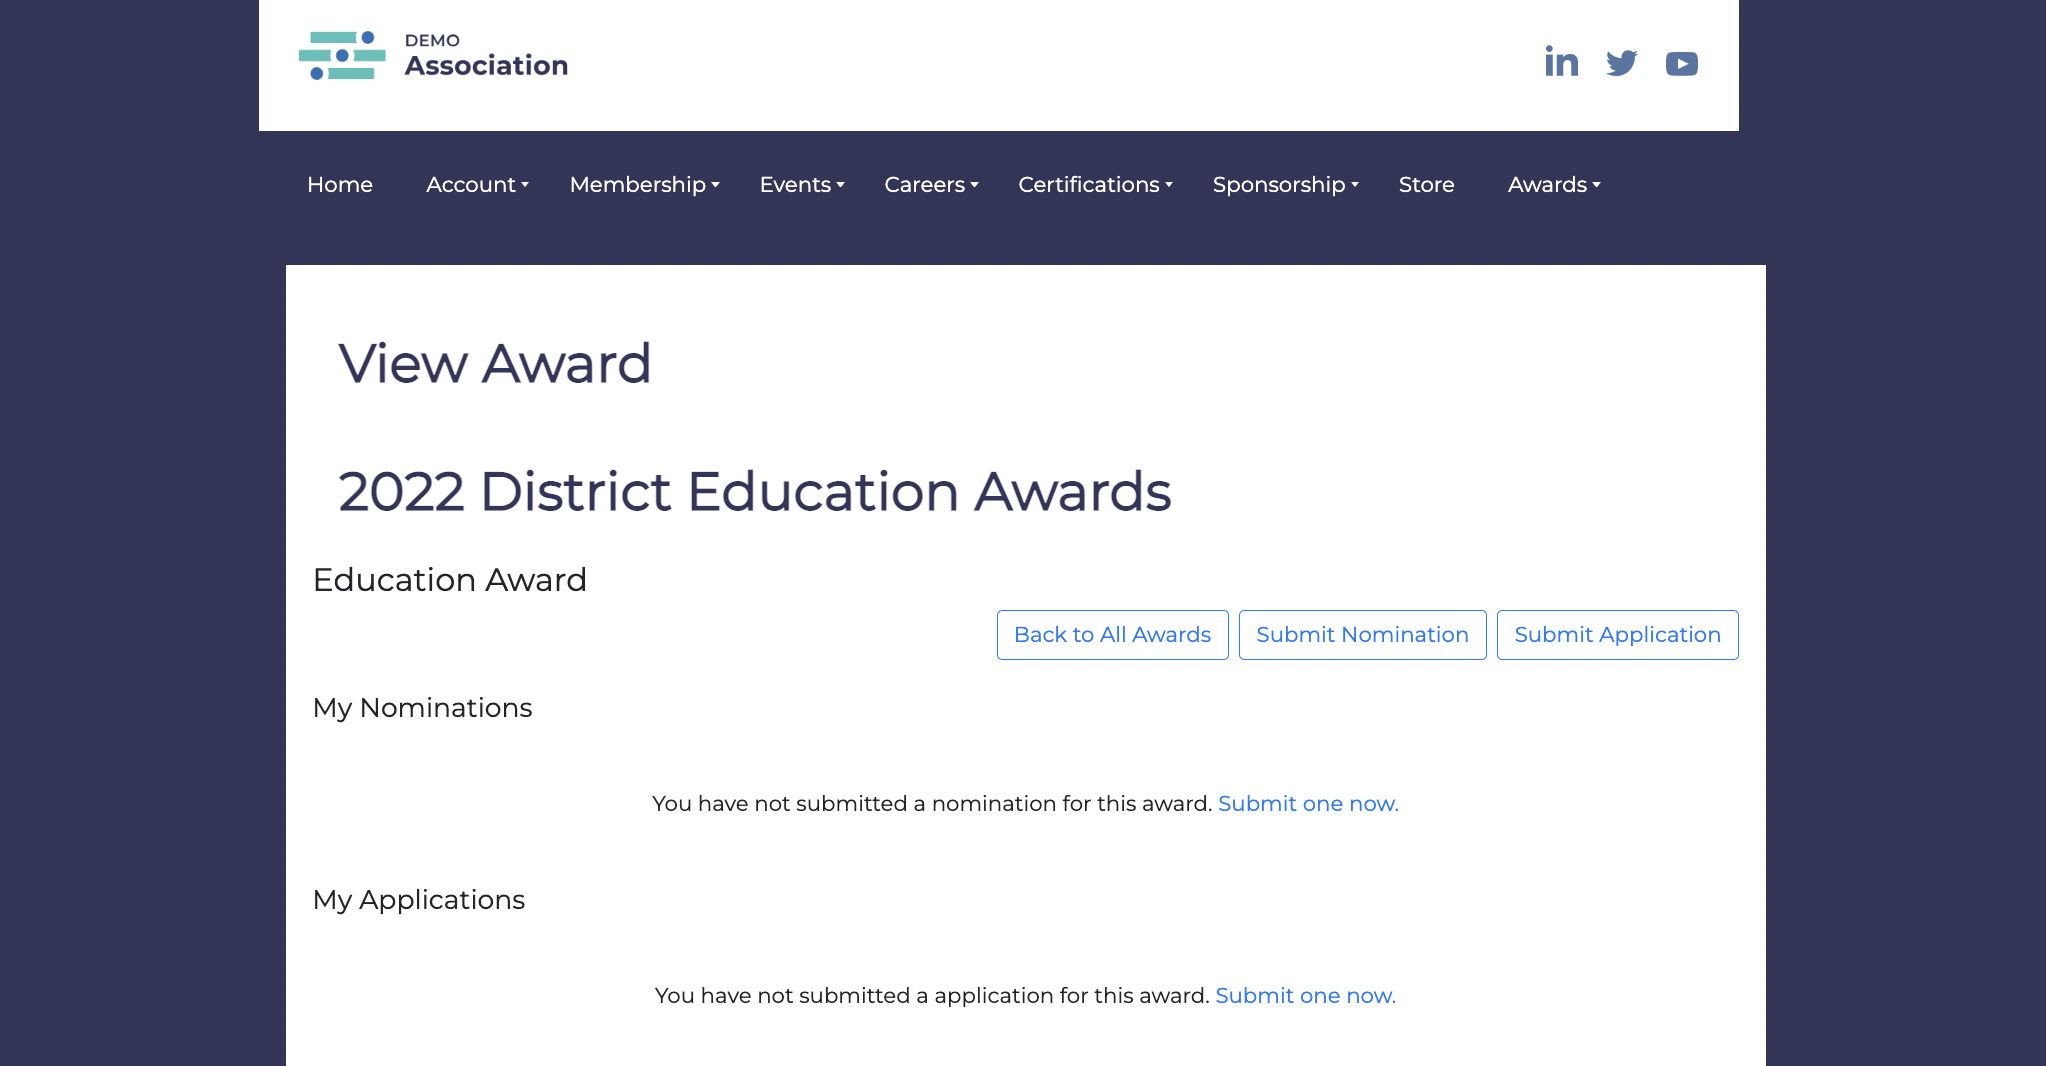 Manage Nominations in One Place